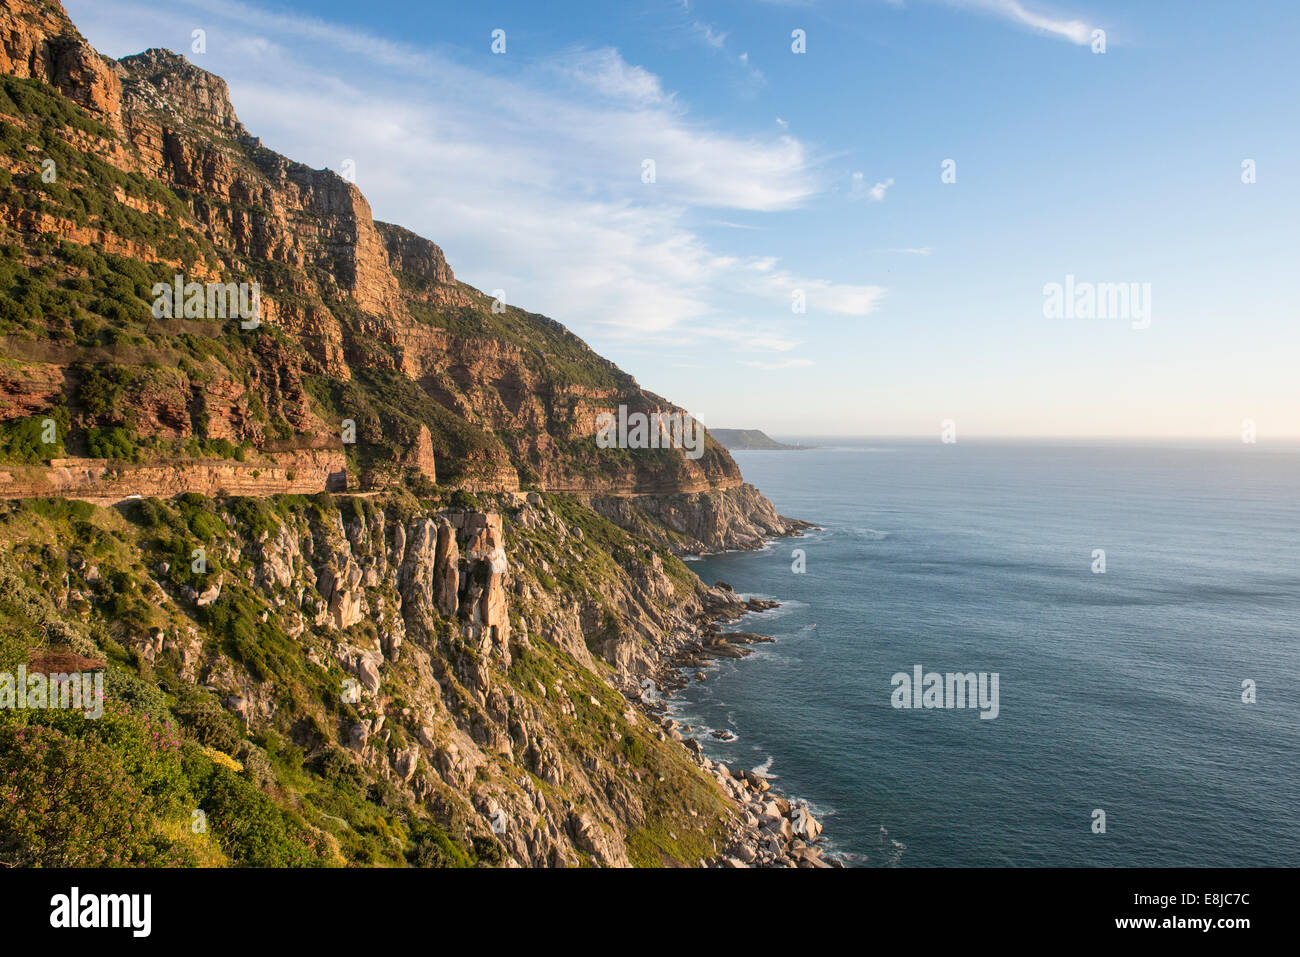 View south from Chapman's Peak along the steep coastline overlooking the Atlantic Ocean, Cape Town, South Africa Stock Photo